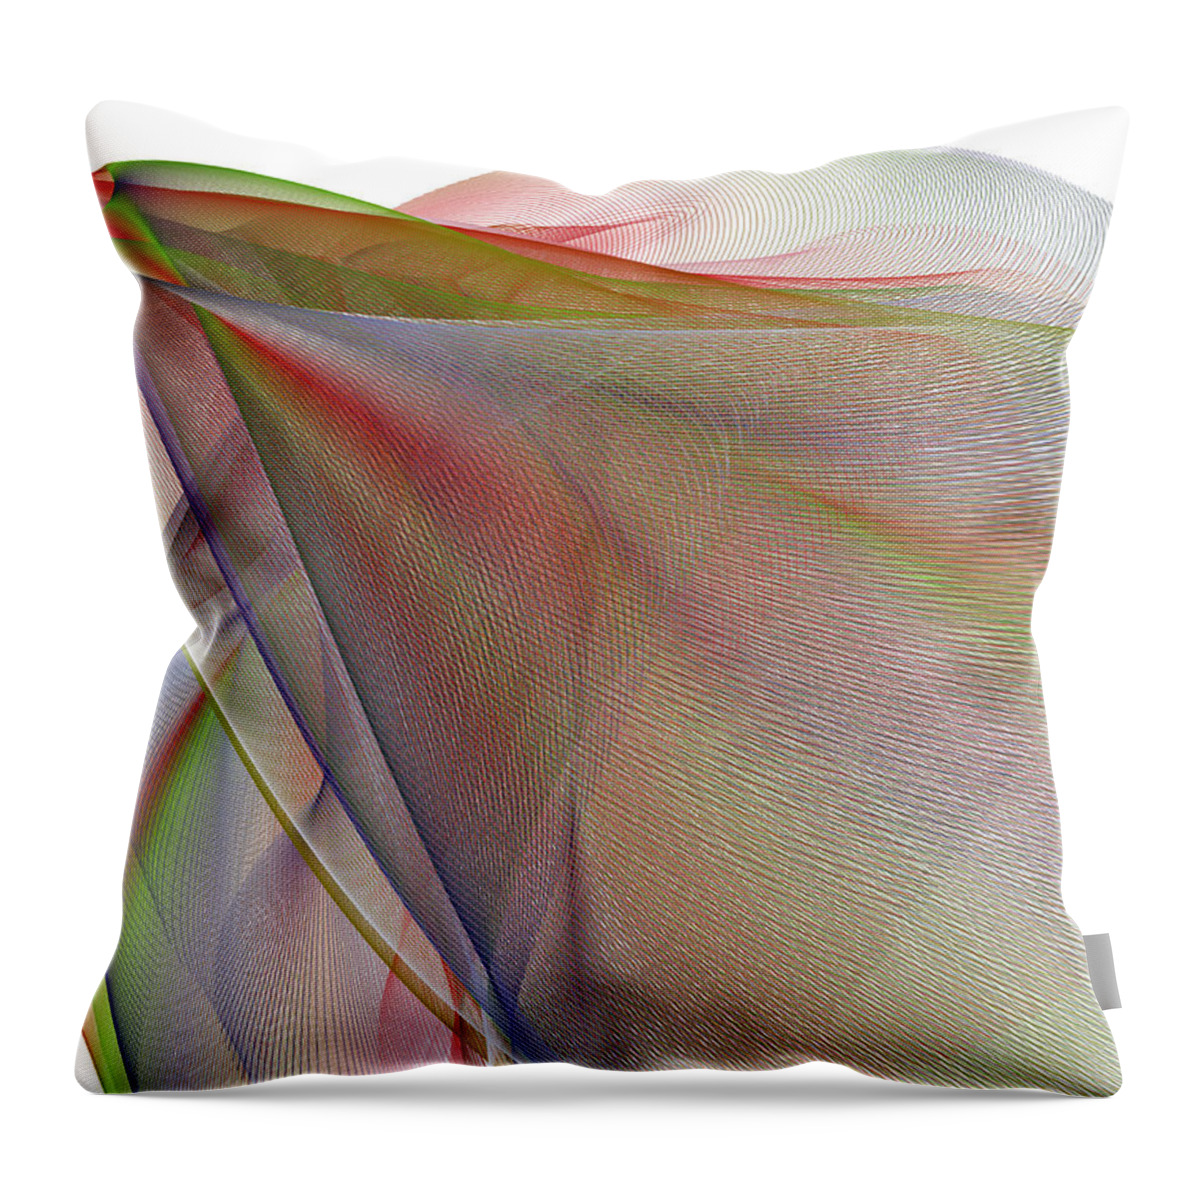 String Art Throw Pillow featuring the digital art Membrane Vessel by Marie Jamieson